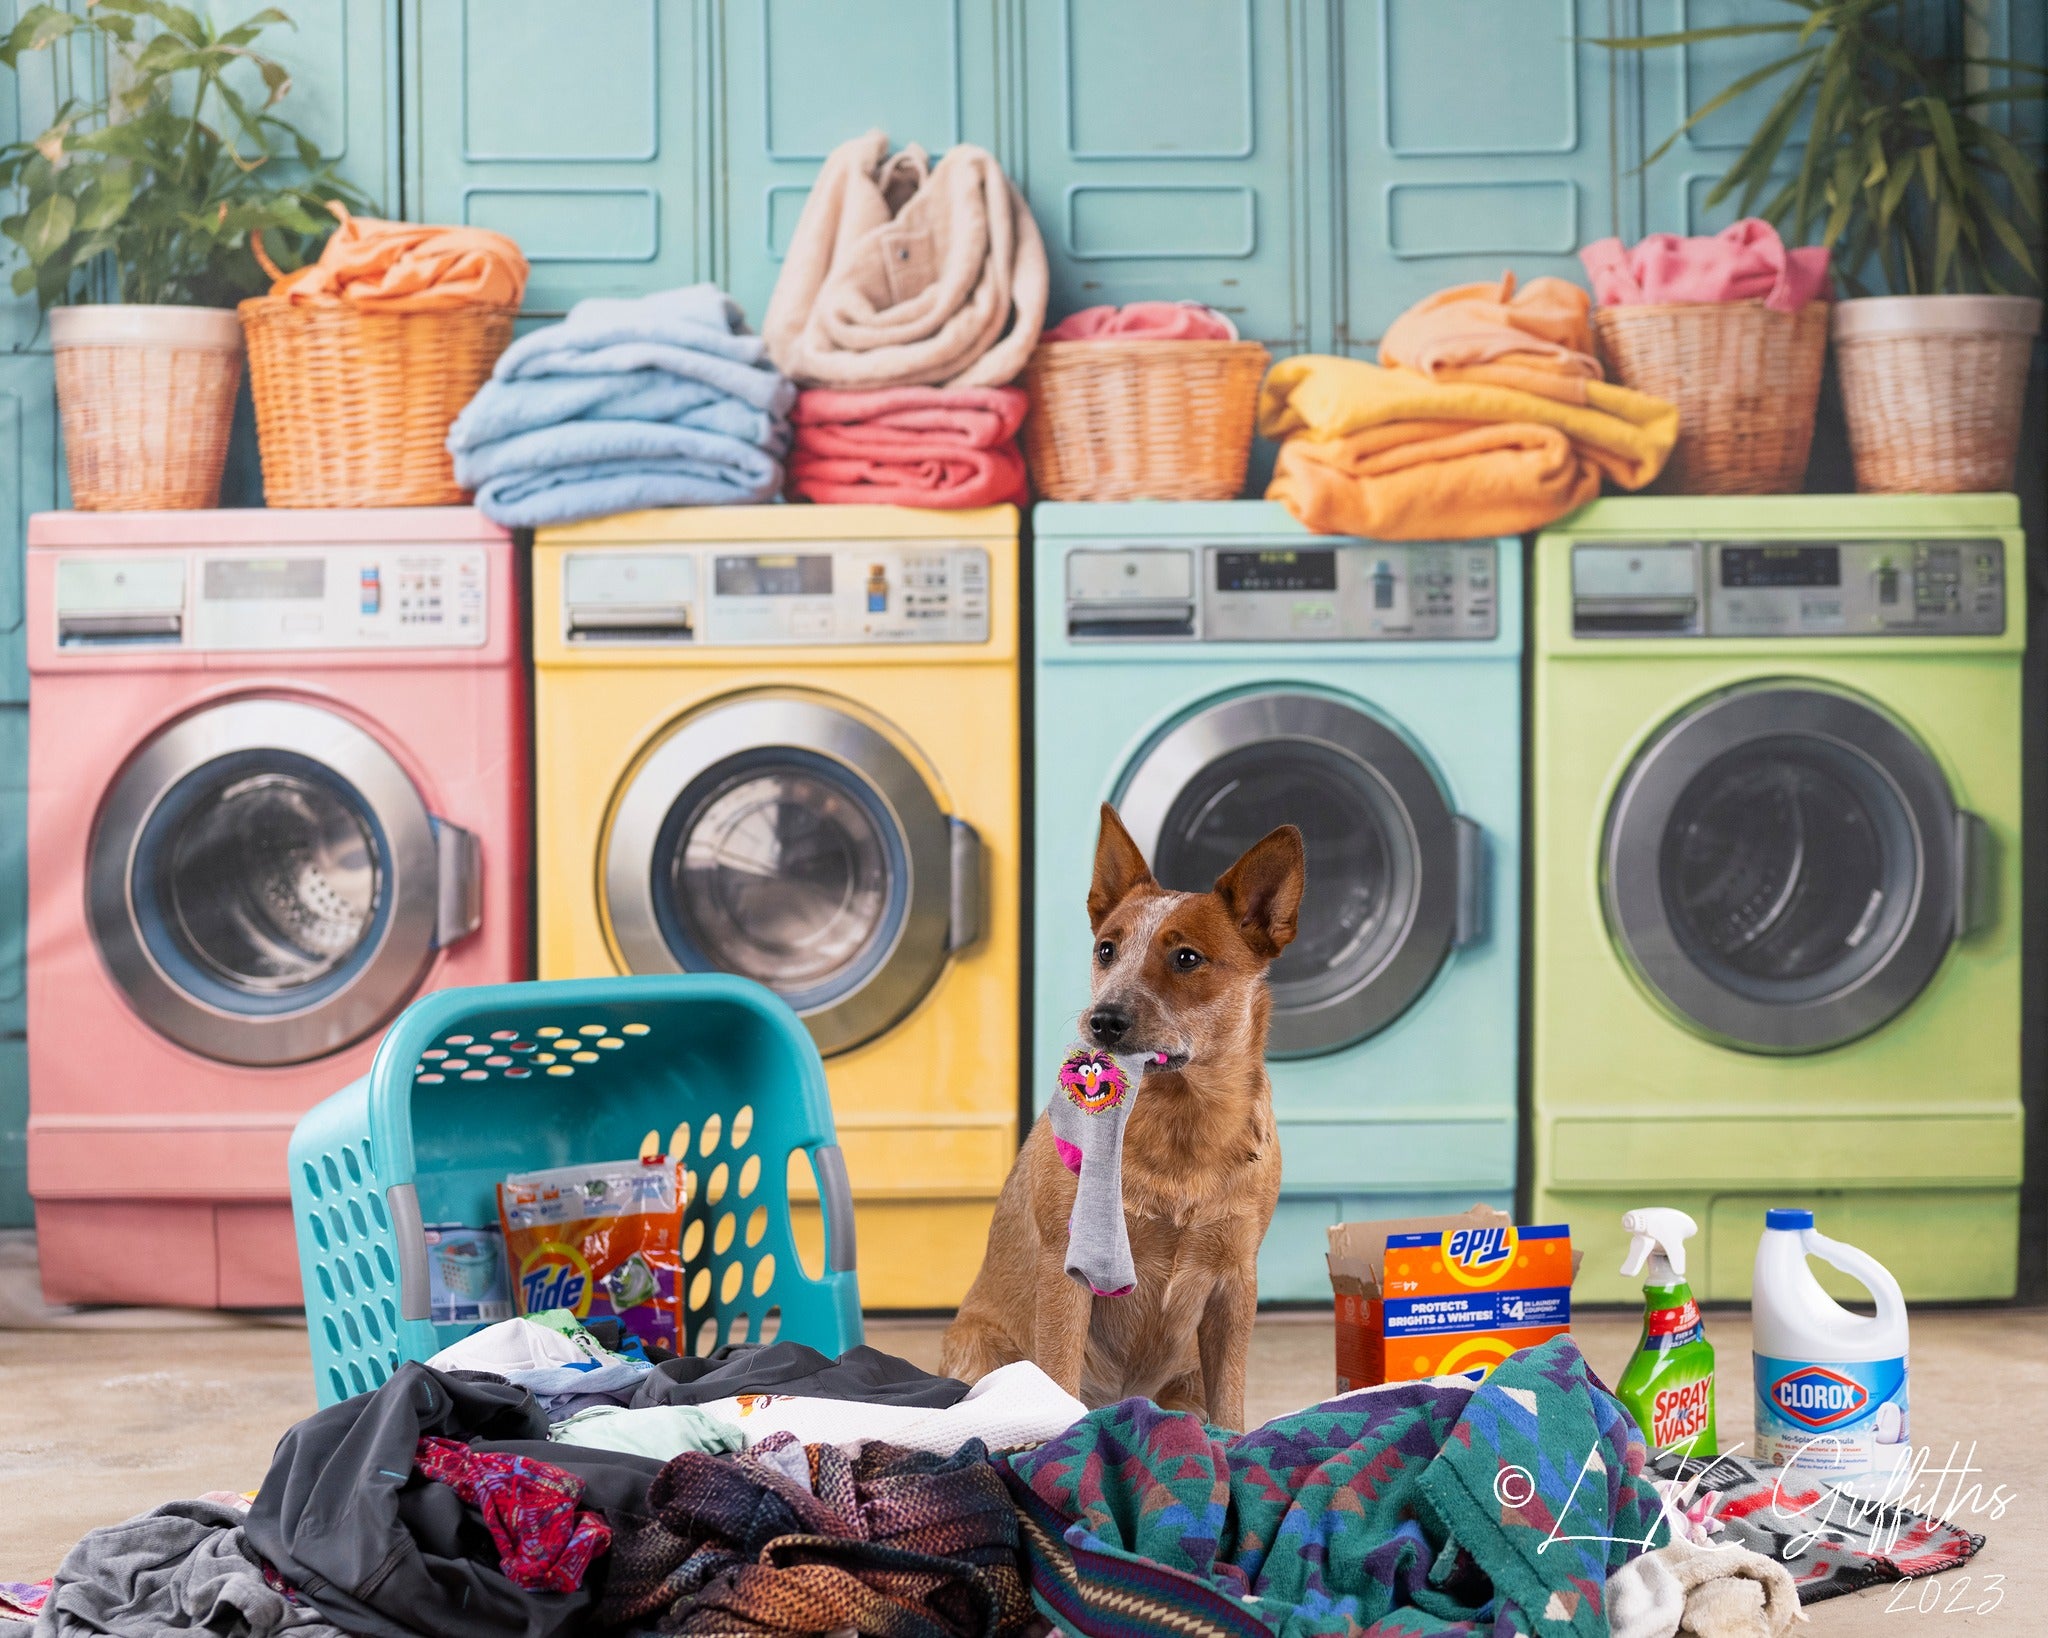 Kate Laundry Day Colorful Washing Machine Backdrop Designed by Chain Photography